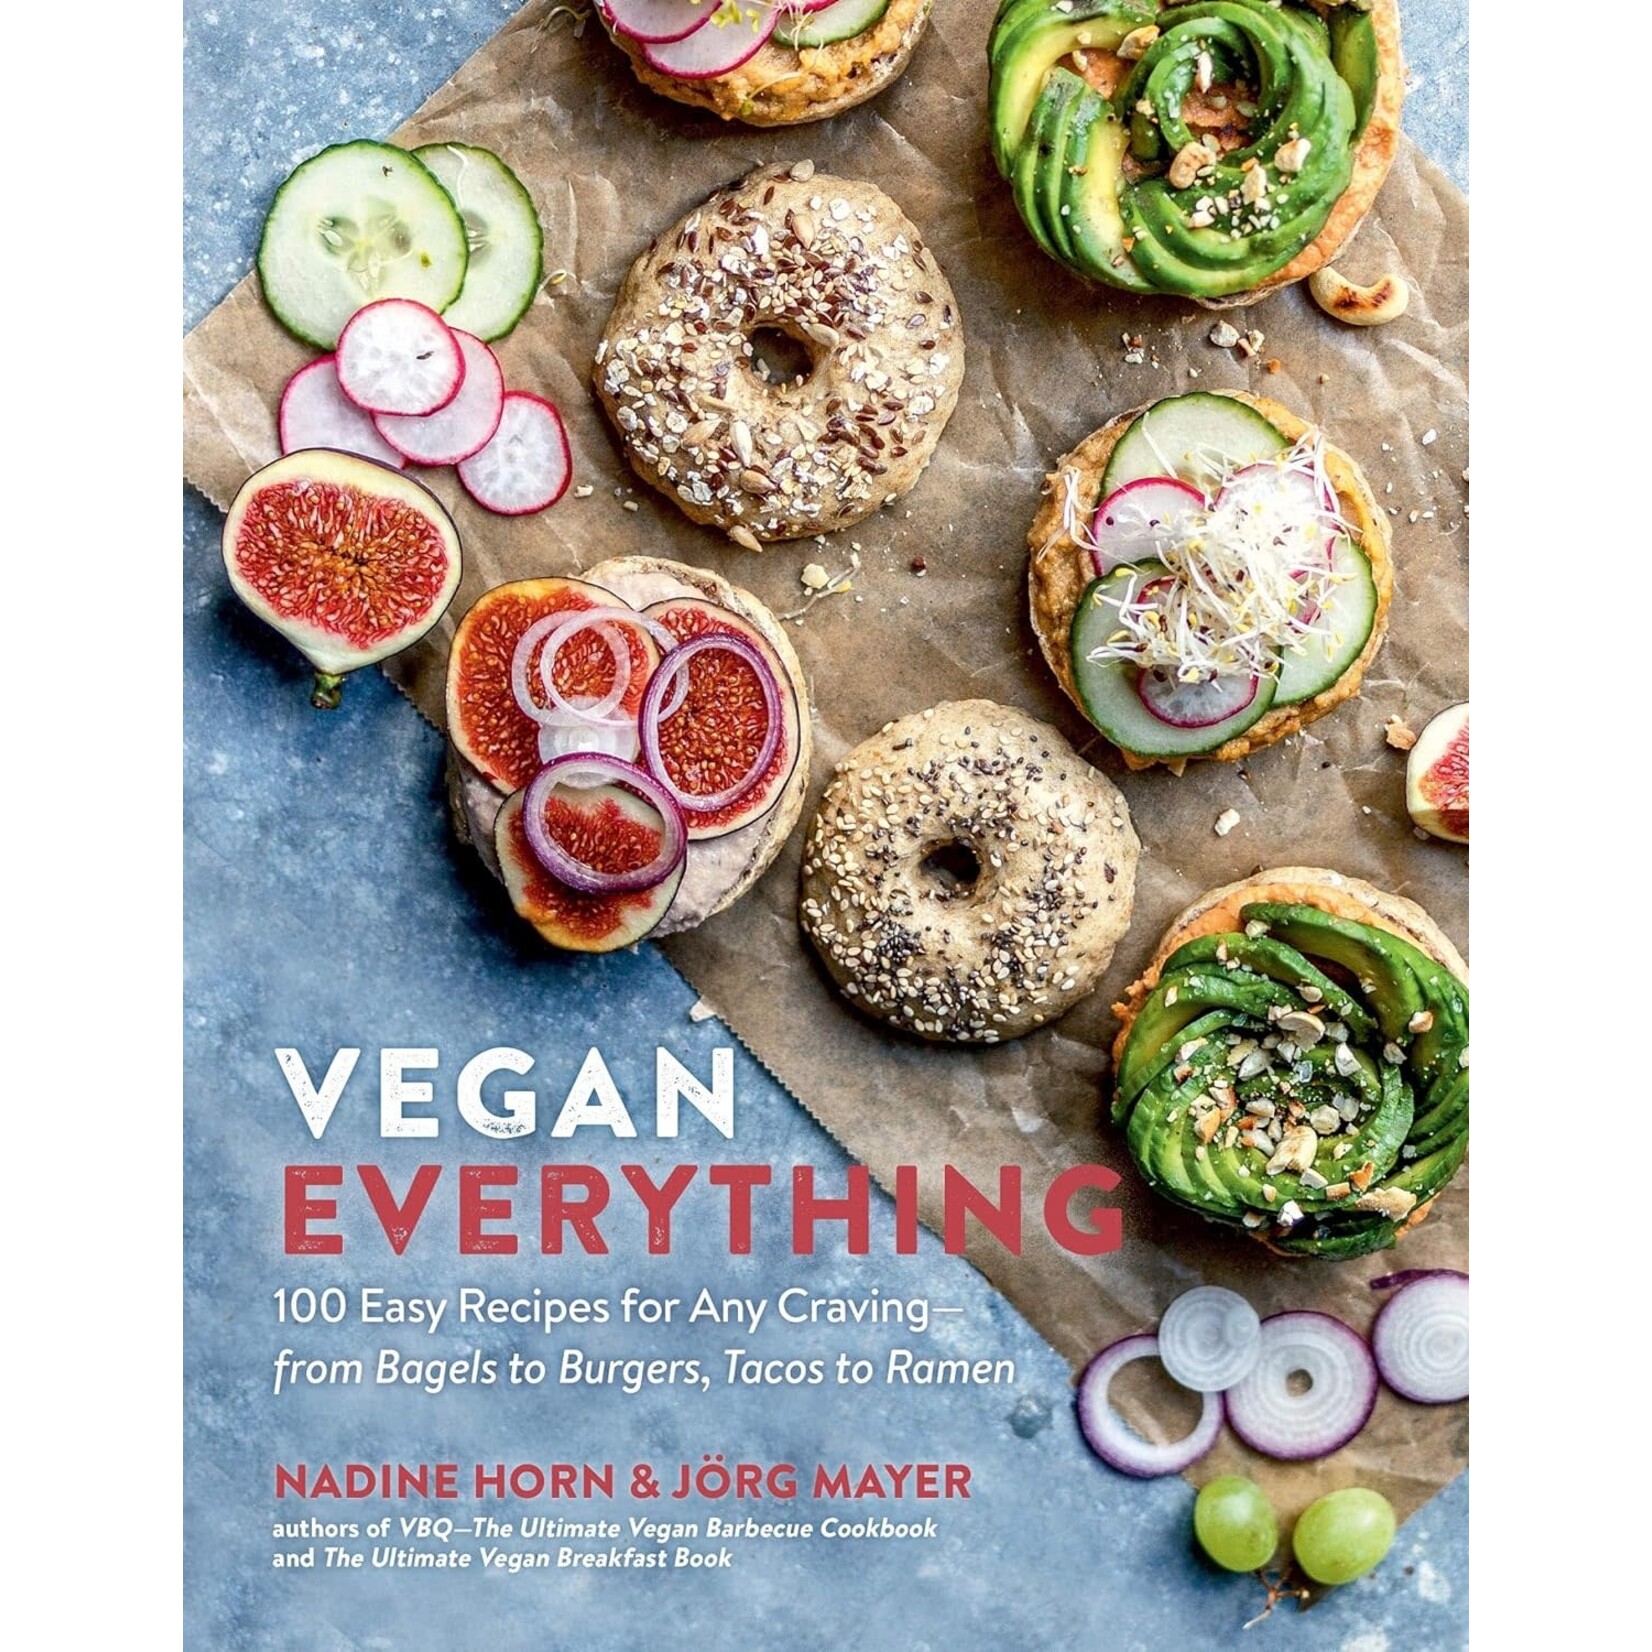 Vegan Everything - 100 Easy Recipes for Any Craving